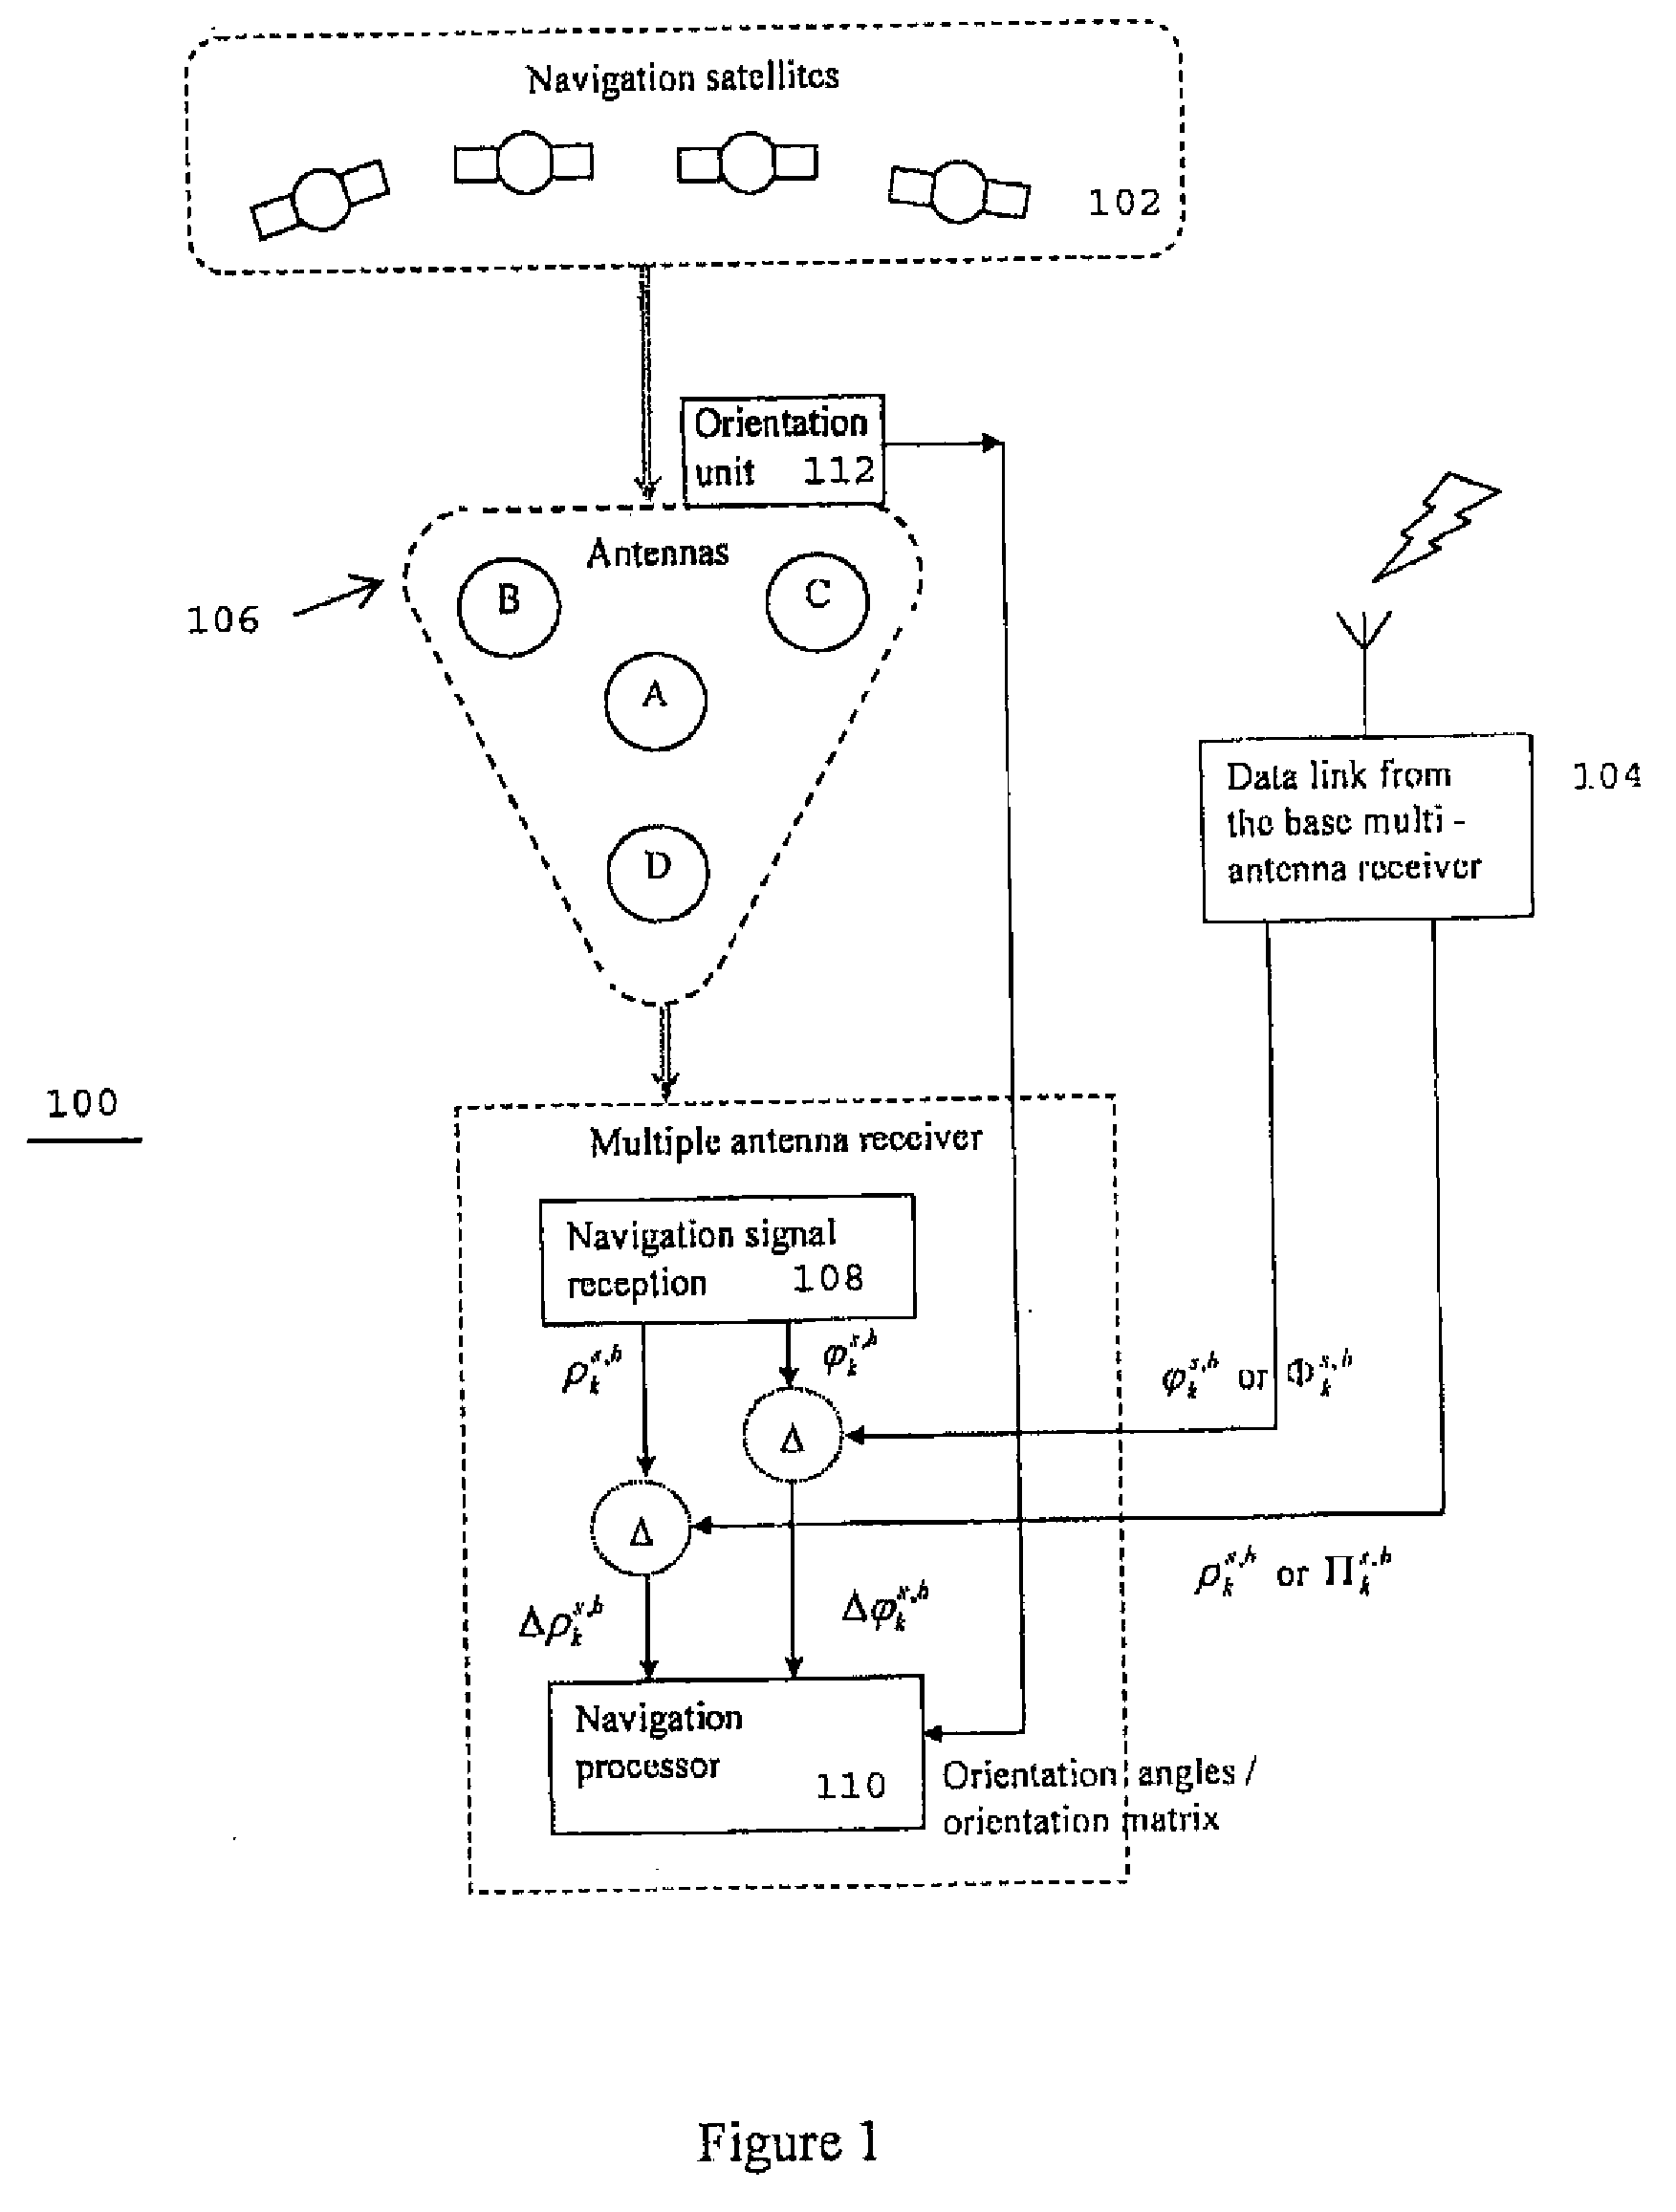 Satellite differential positioning receiver using multiple base-rover antennas